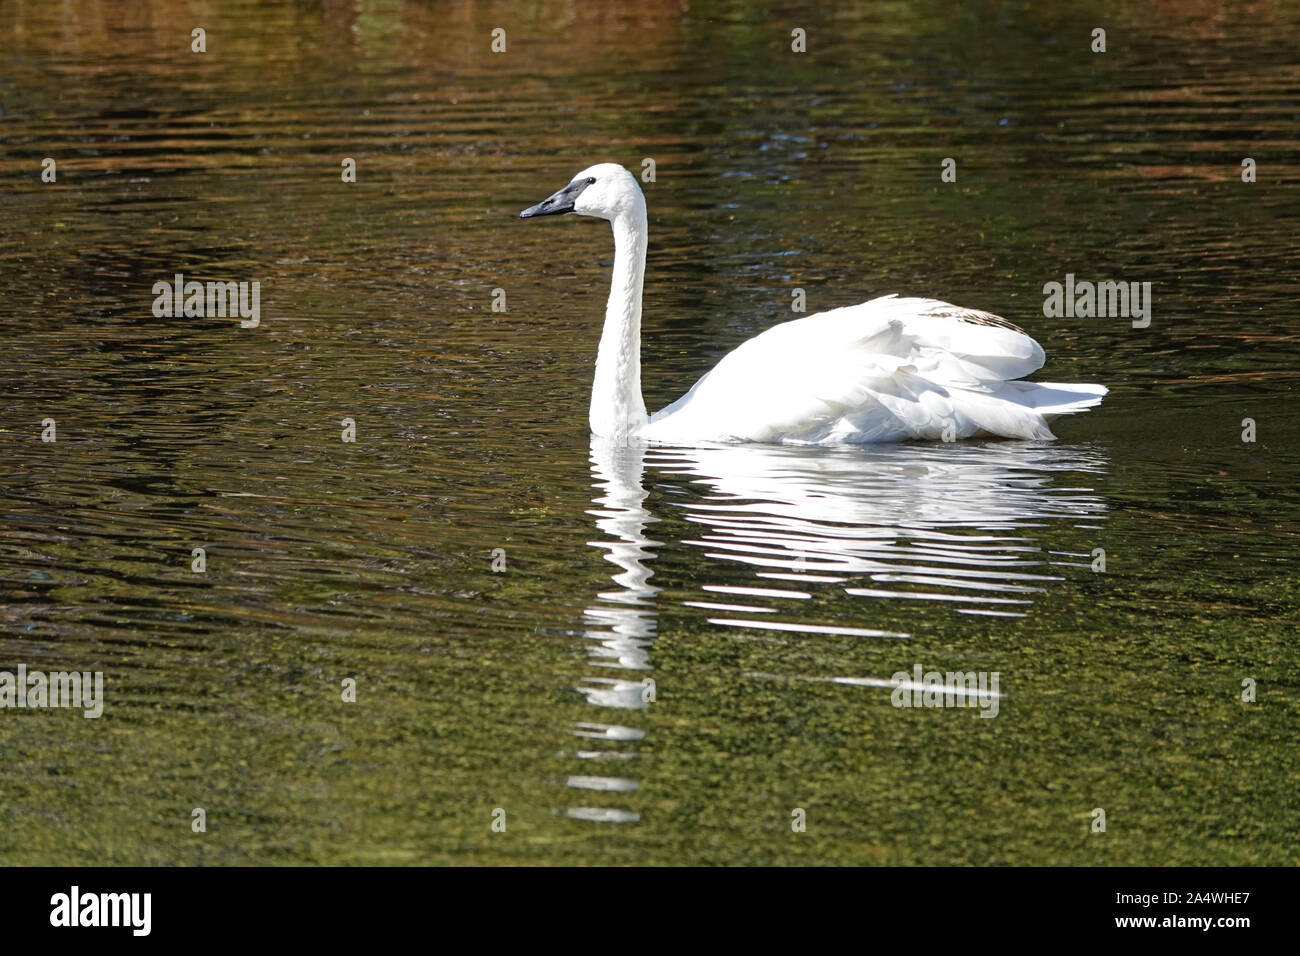 Trumpeter Swans, Cygnus buccinator, glide slowly on an algae encrusted pond in Central Oregon Stock Photo